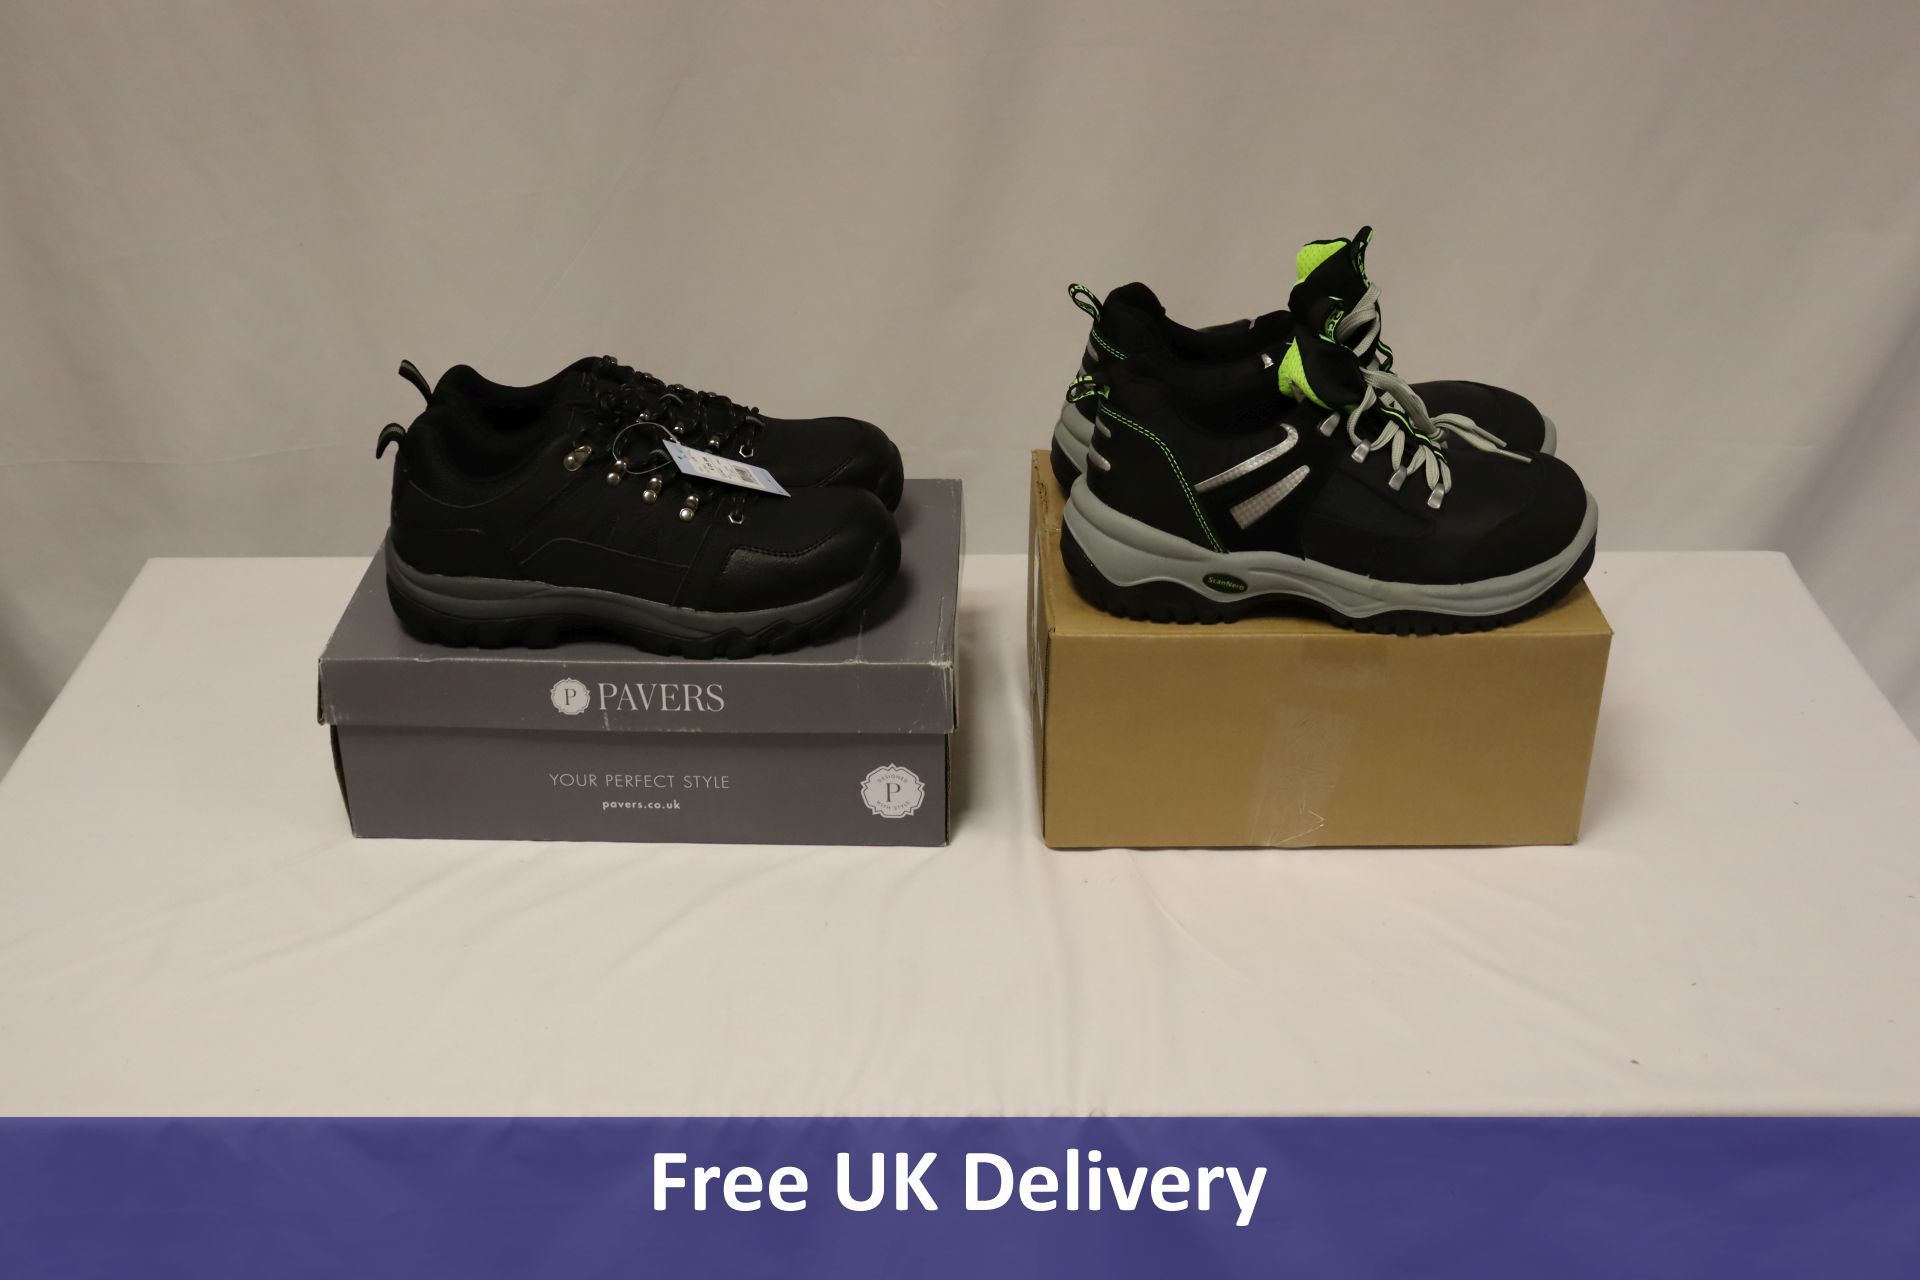 Two Men's Safety Trainers to include 1x Scandia ScanNero, Black/Silver, UK 8, 1x Pavers Steel Toe Ca